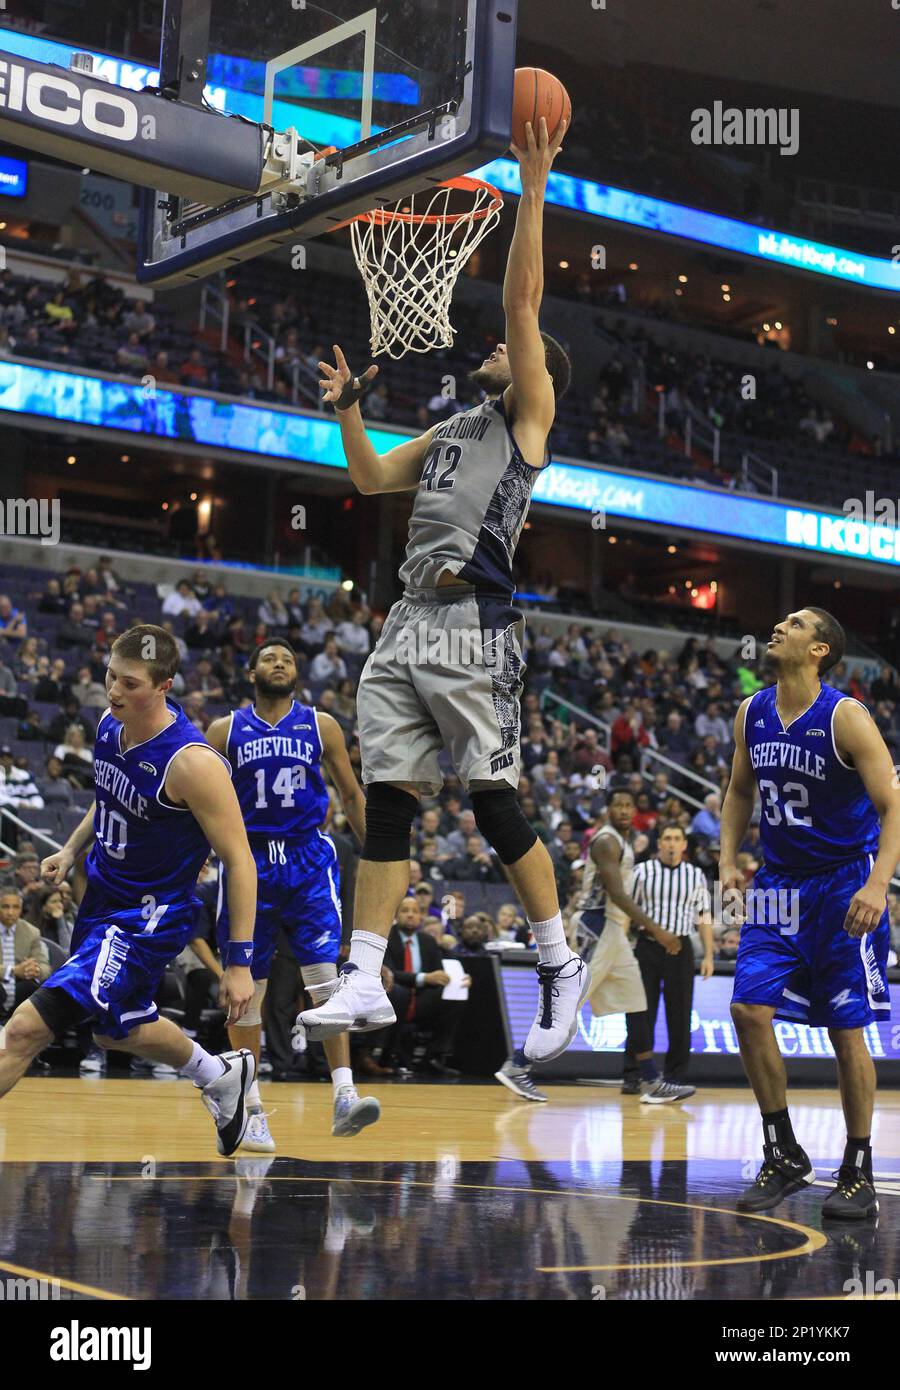 December 19 2015: Georgetown Hoyas center Bradley Hayes (42) shoots a basket  during a NCAA men's basketball match at Verizon Center, in Washington D.C.  N.C Asheville defeated Georgetown 79-73. (Photo by Tony